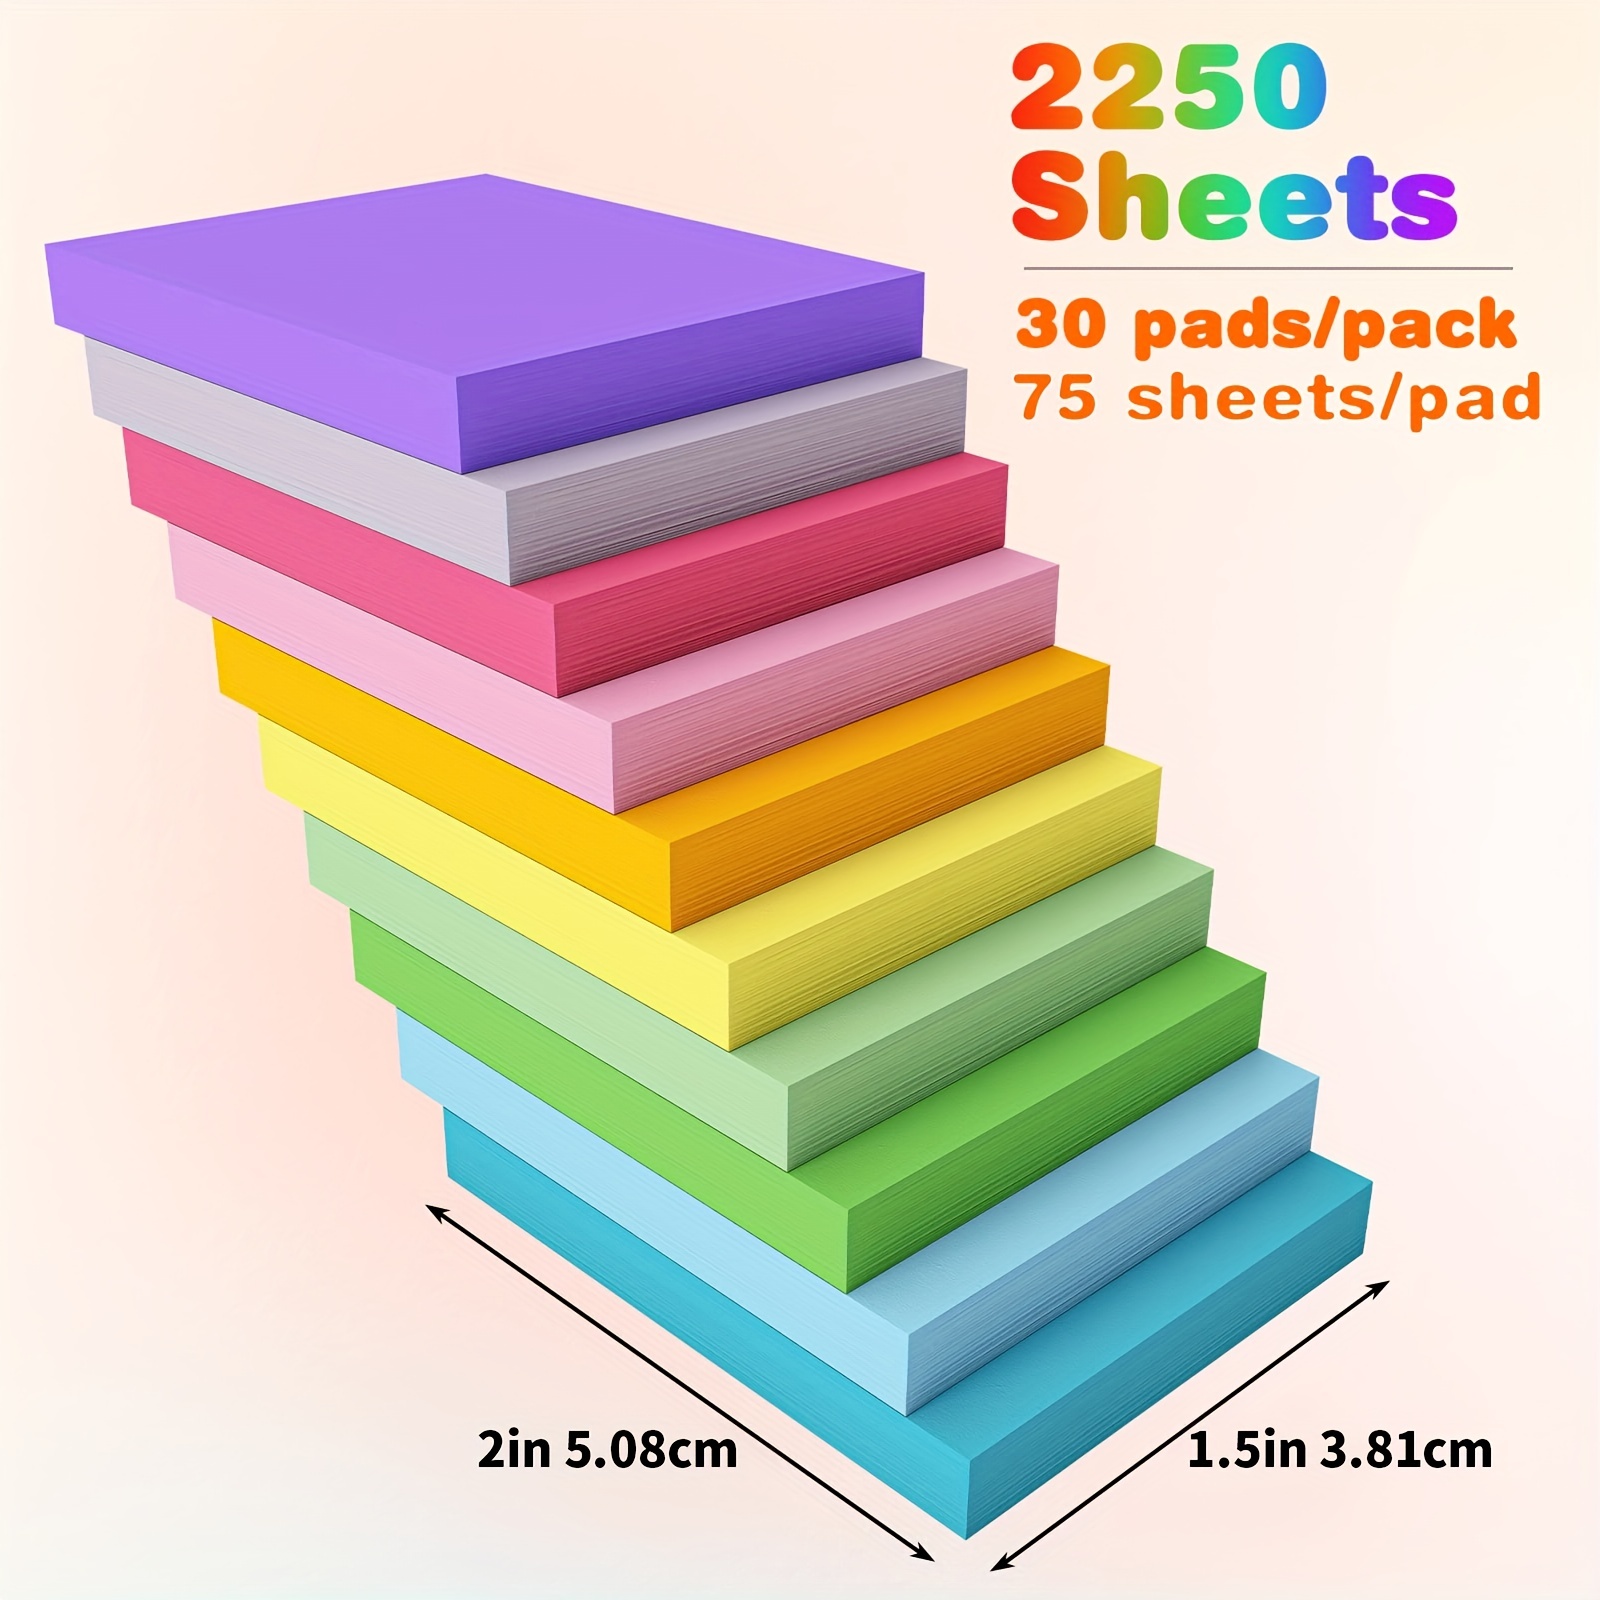 Cocoboo 20 Pads Mini Sticky Notes, 10 Colors, 1.5 x 2 Inches Small Self-Stick Notes, 100 Sheets per Pad, Post Notes for School and Office